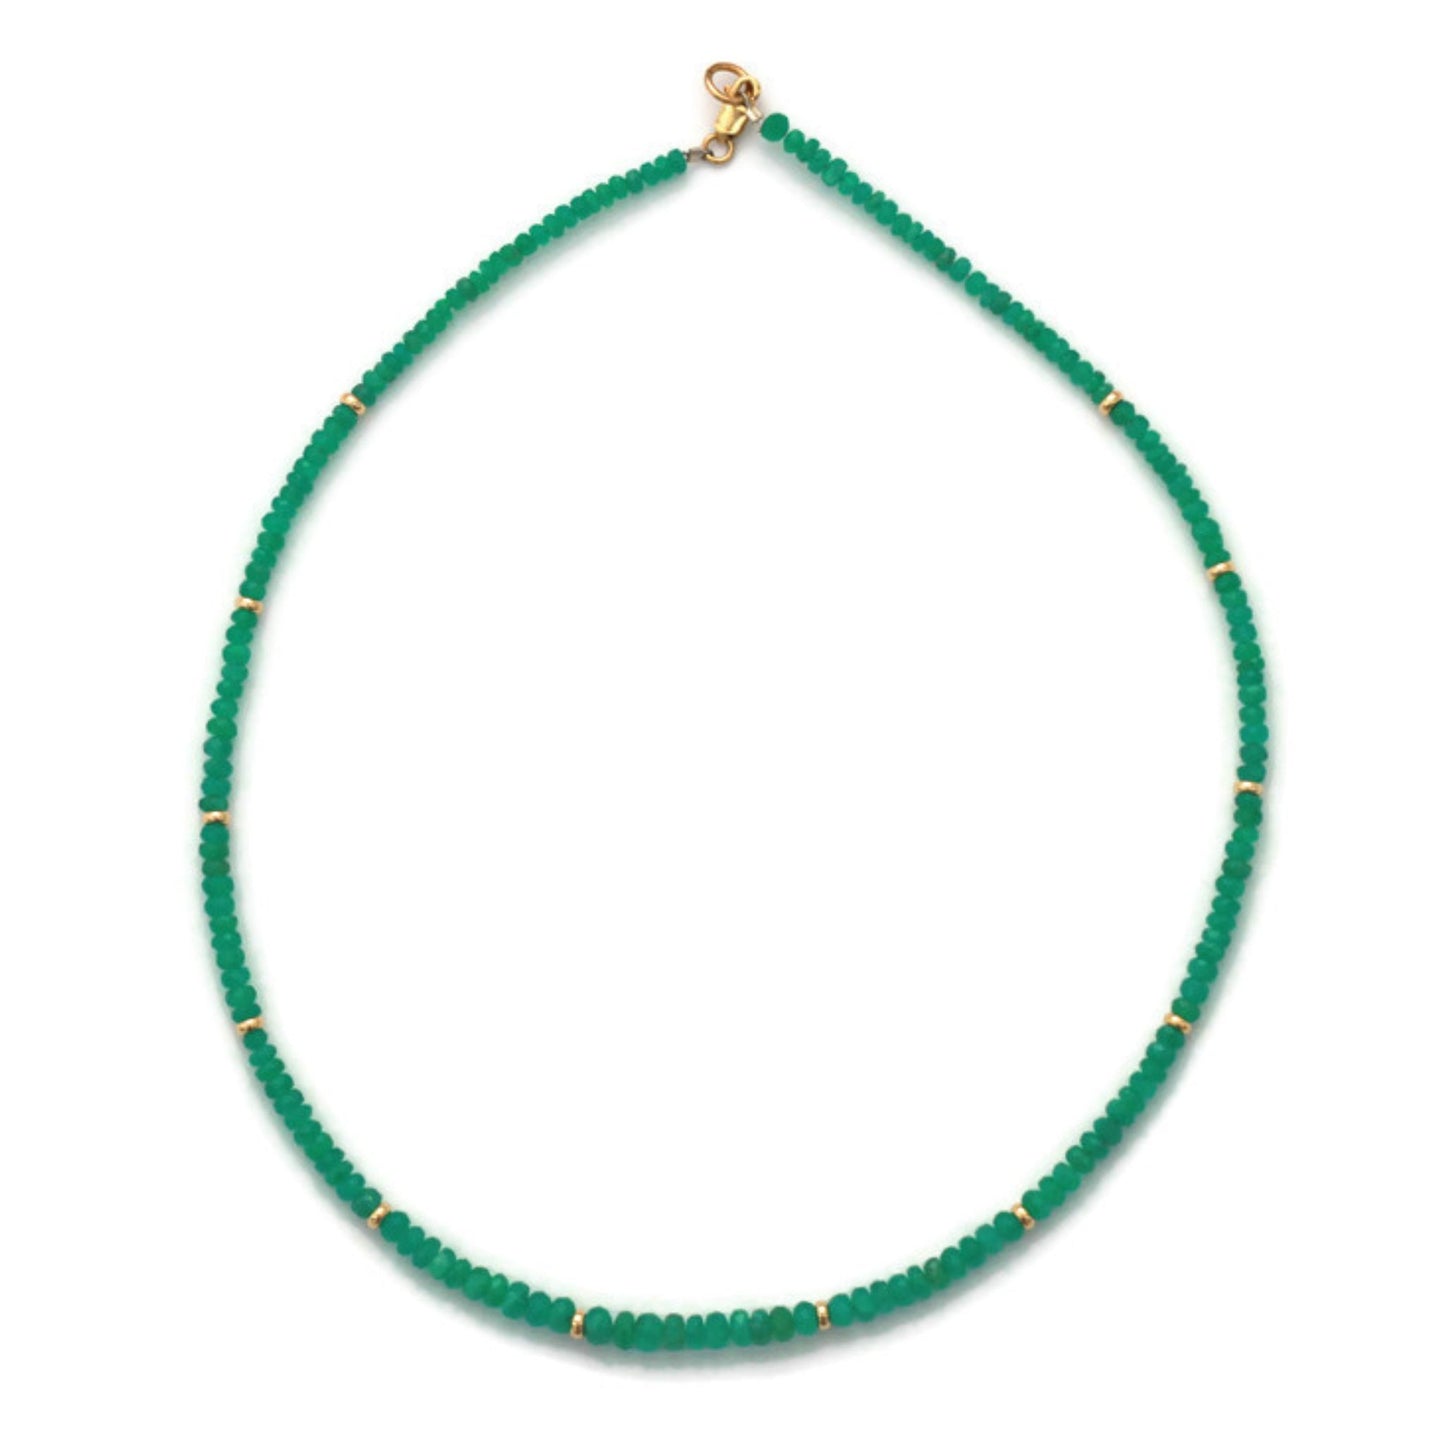 Genuine Emerald and 14K Gold Necklace